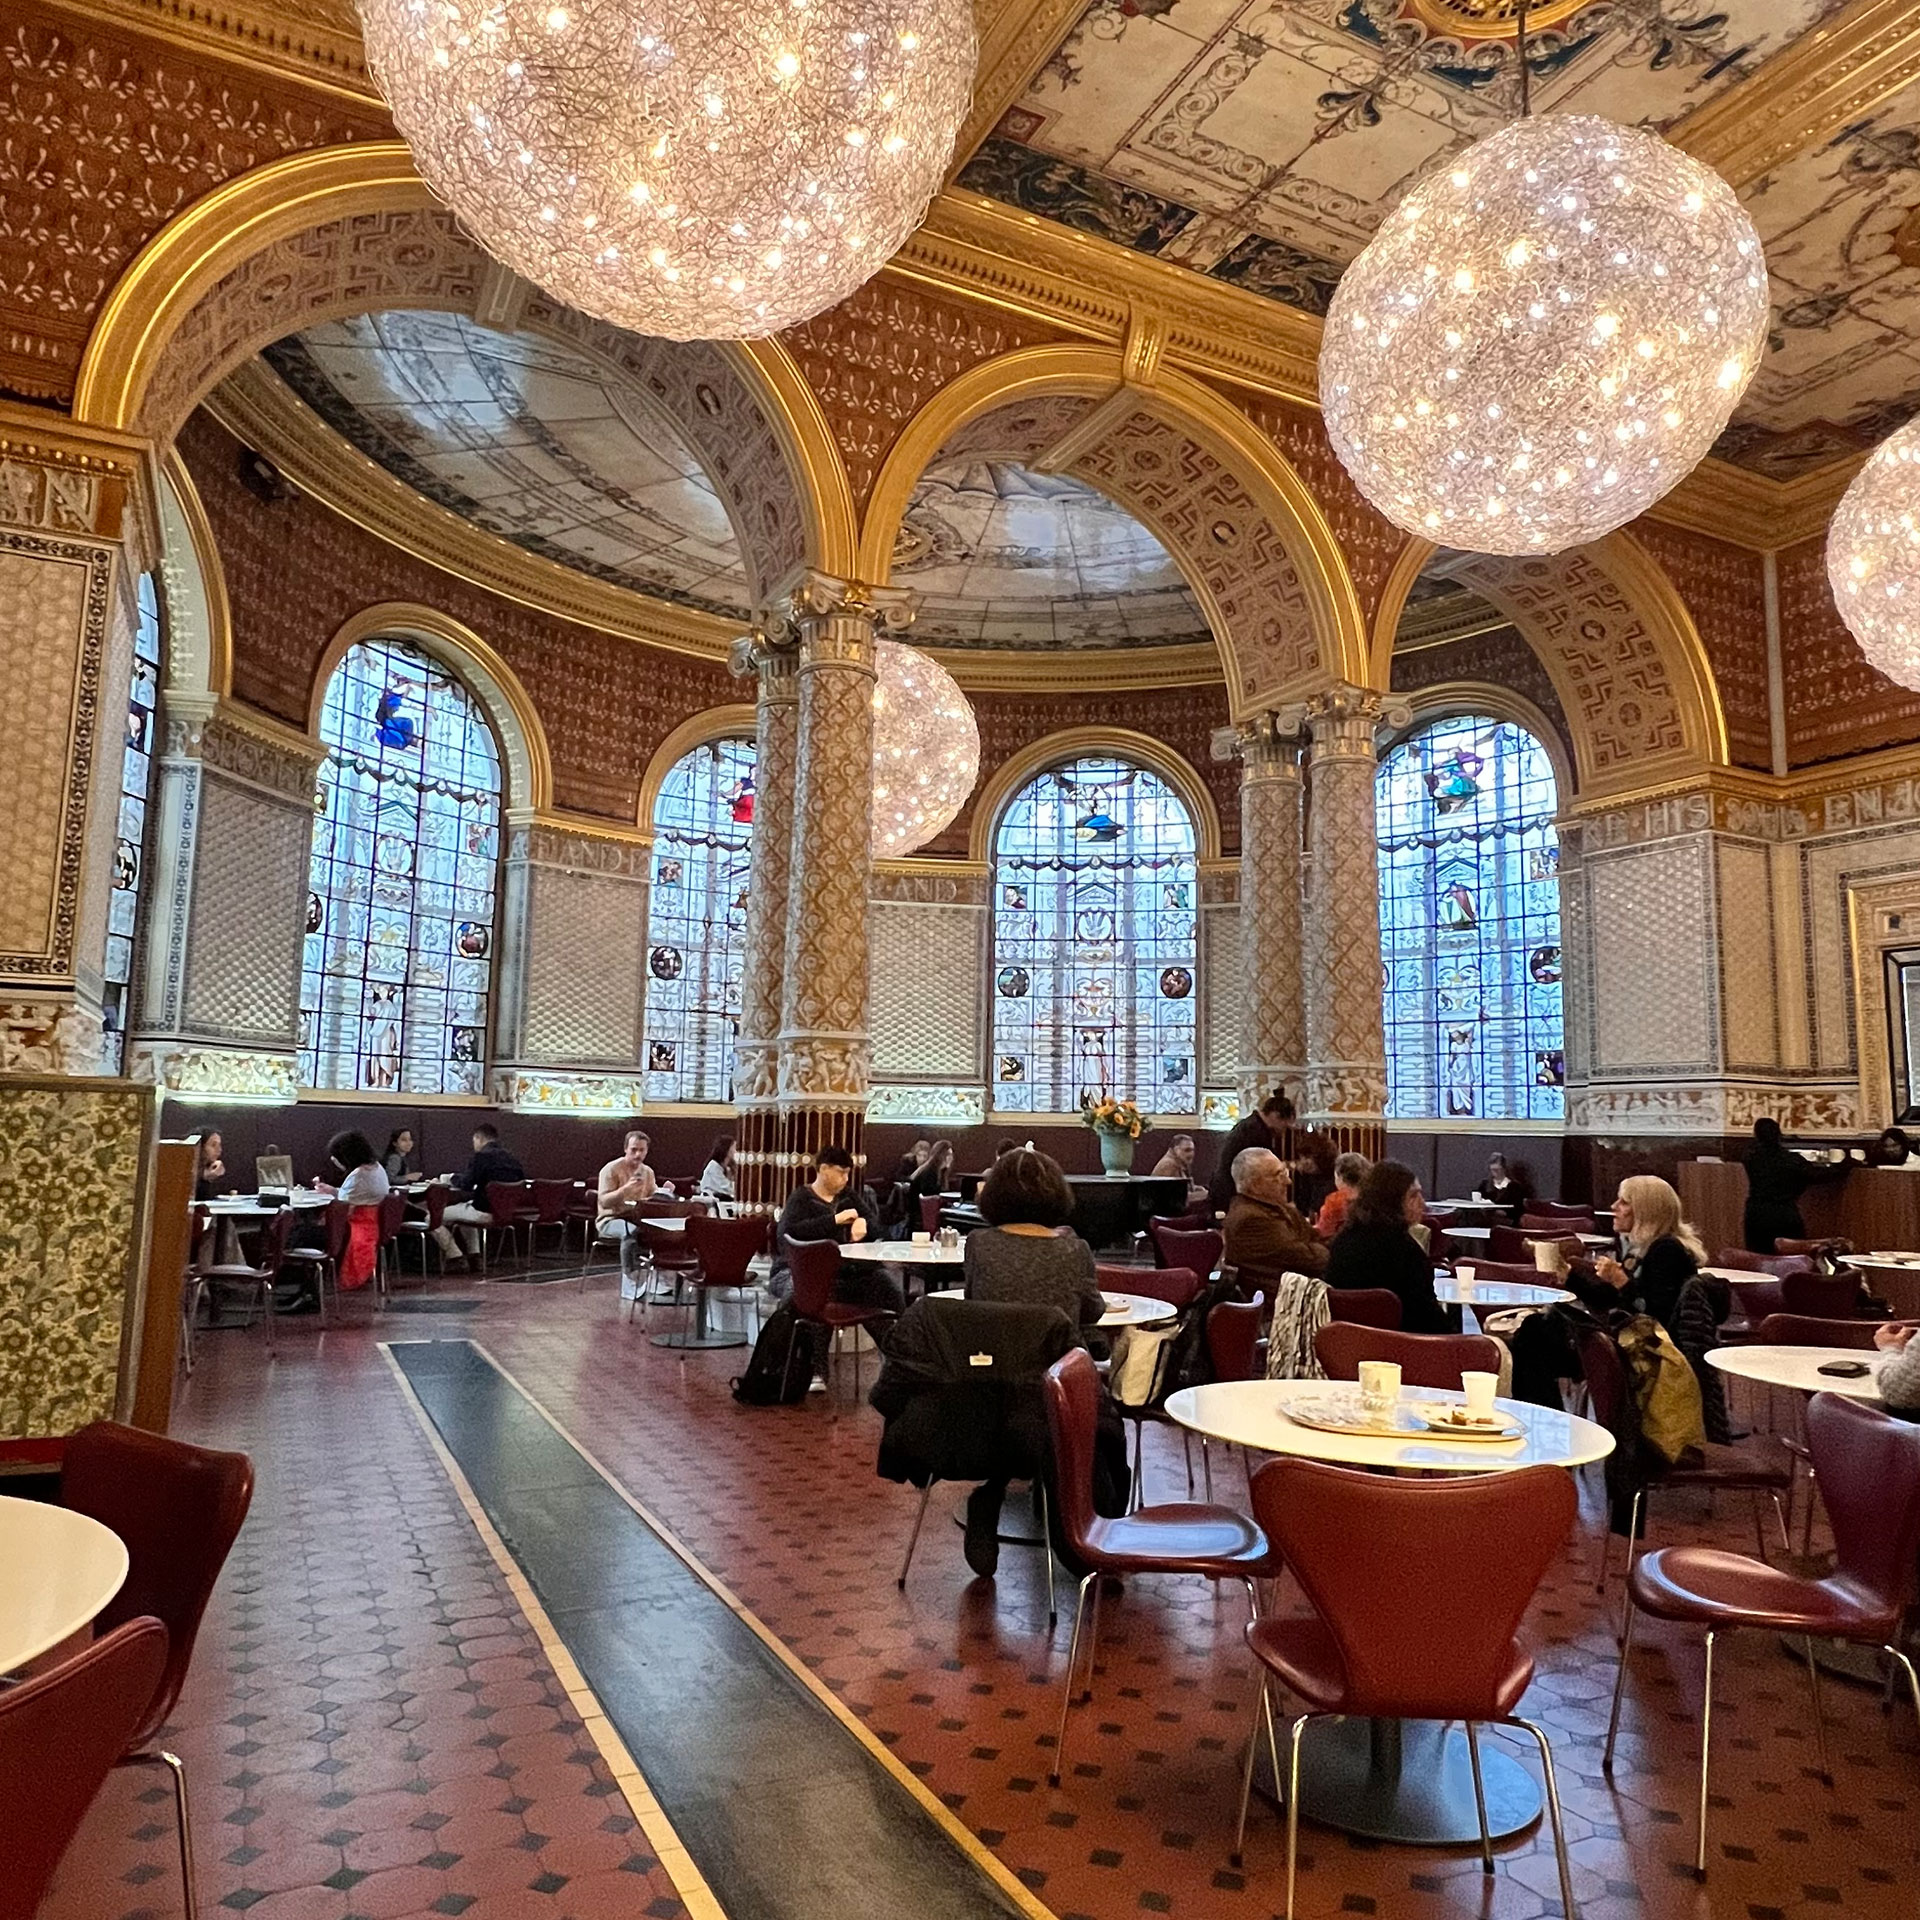 View of the cafe inside the Victoria and Albert Museum in London with people eating on cafe tables surrounded by ornate chandeliers and historic architecture